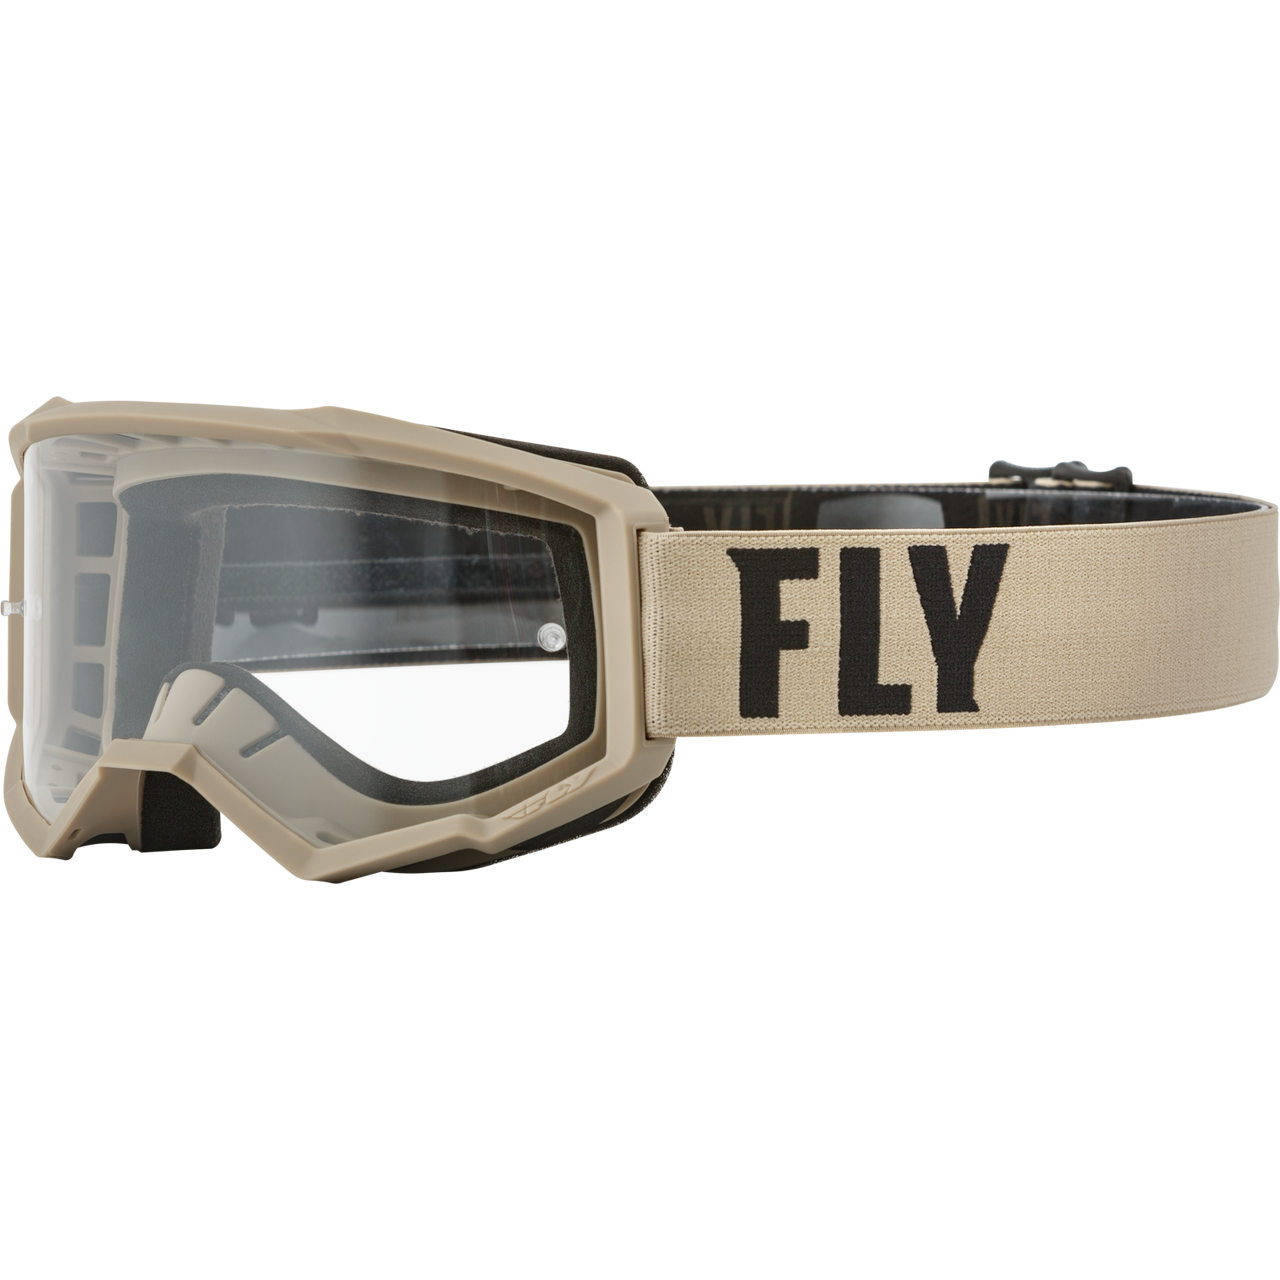 Fly Focus Goggles